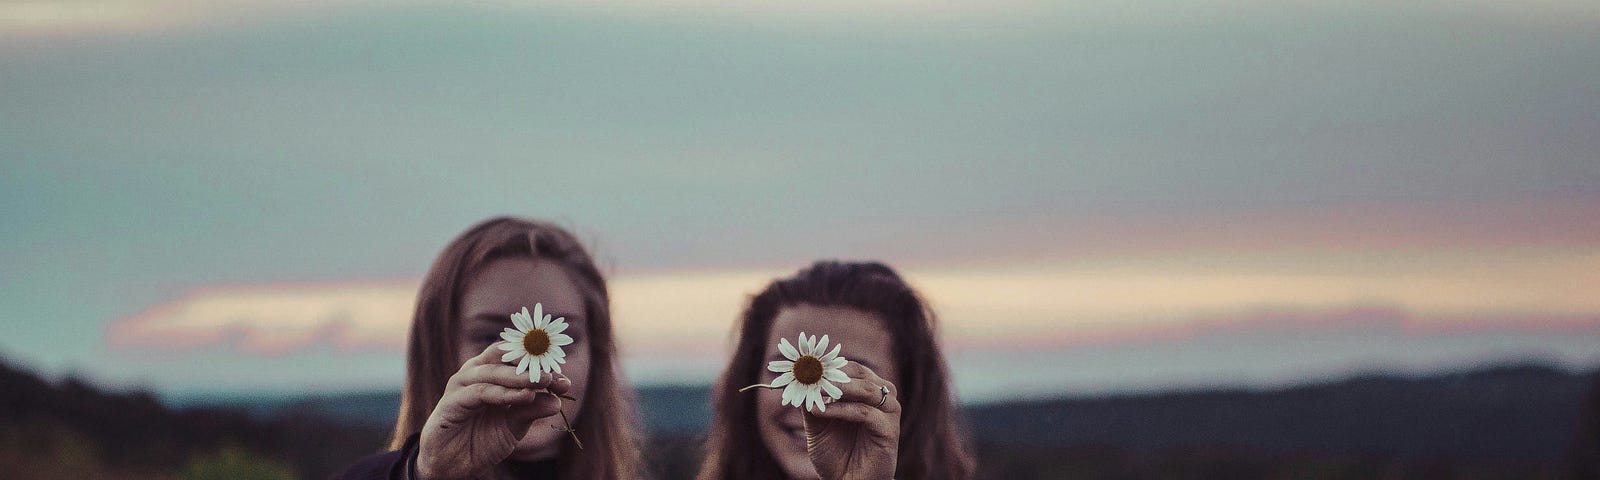 two girls with a flower in their hand covering their face